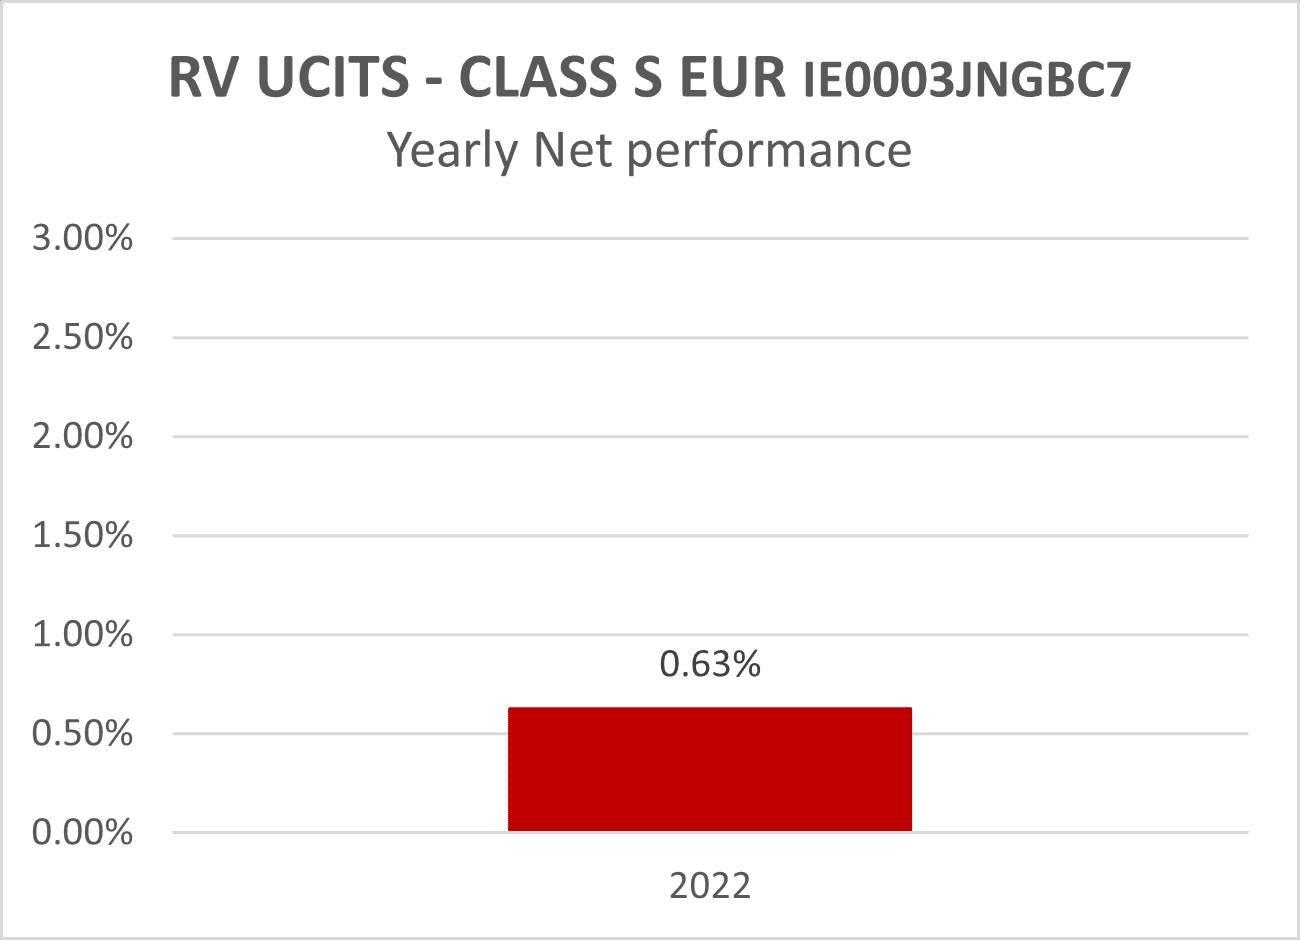 RV UCITS - CLASS S EUR IE0003JNGBC7 - Yearly Net performance